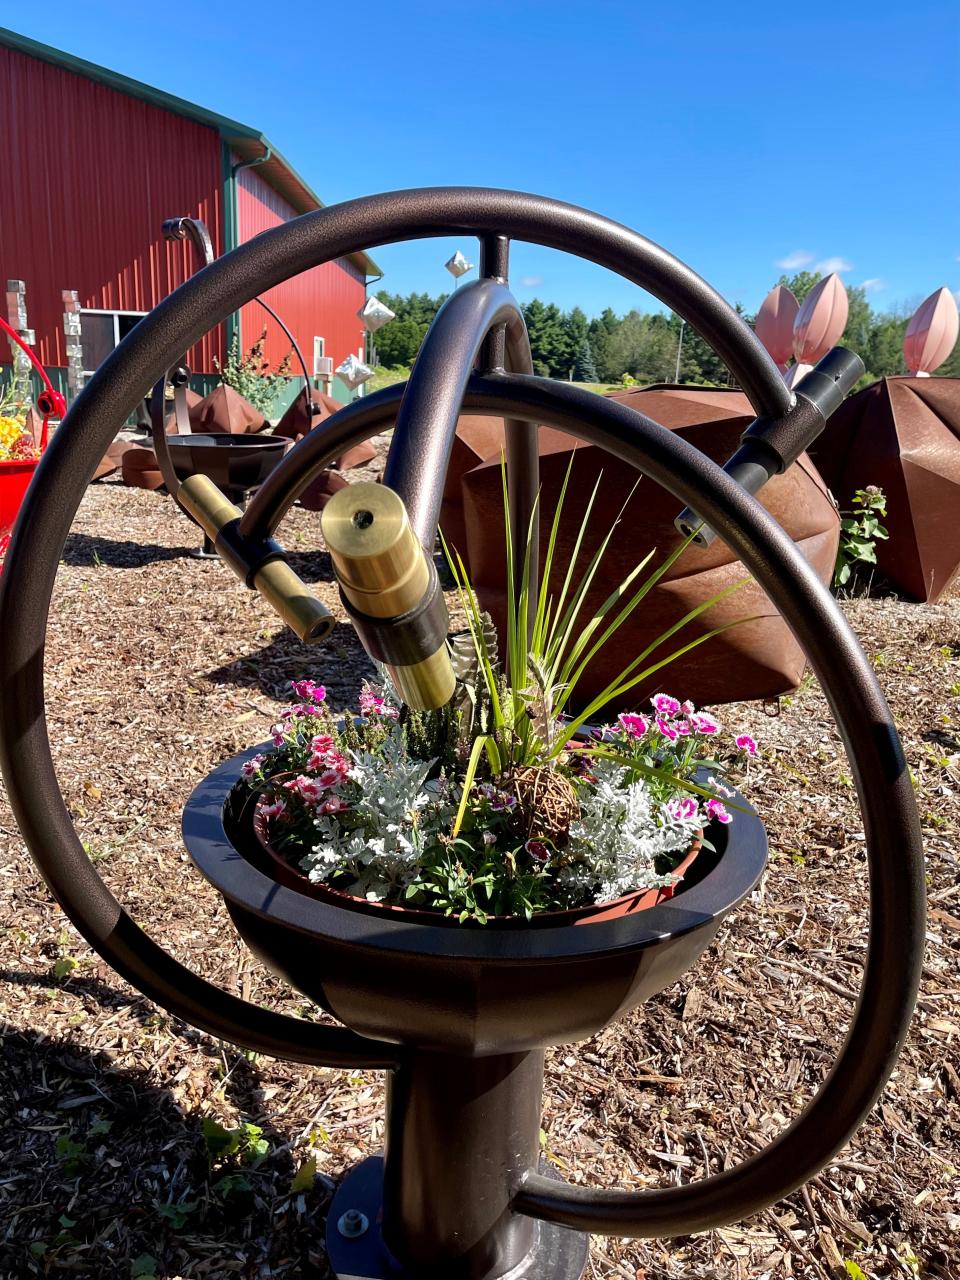 Door County artist Robert Anderson's garden kaleidoscopes can be found in botanical gardens and public spaces across the country, including more than 30 in Wisconsin.